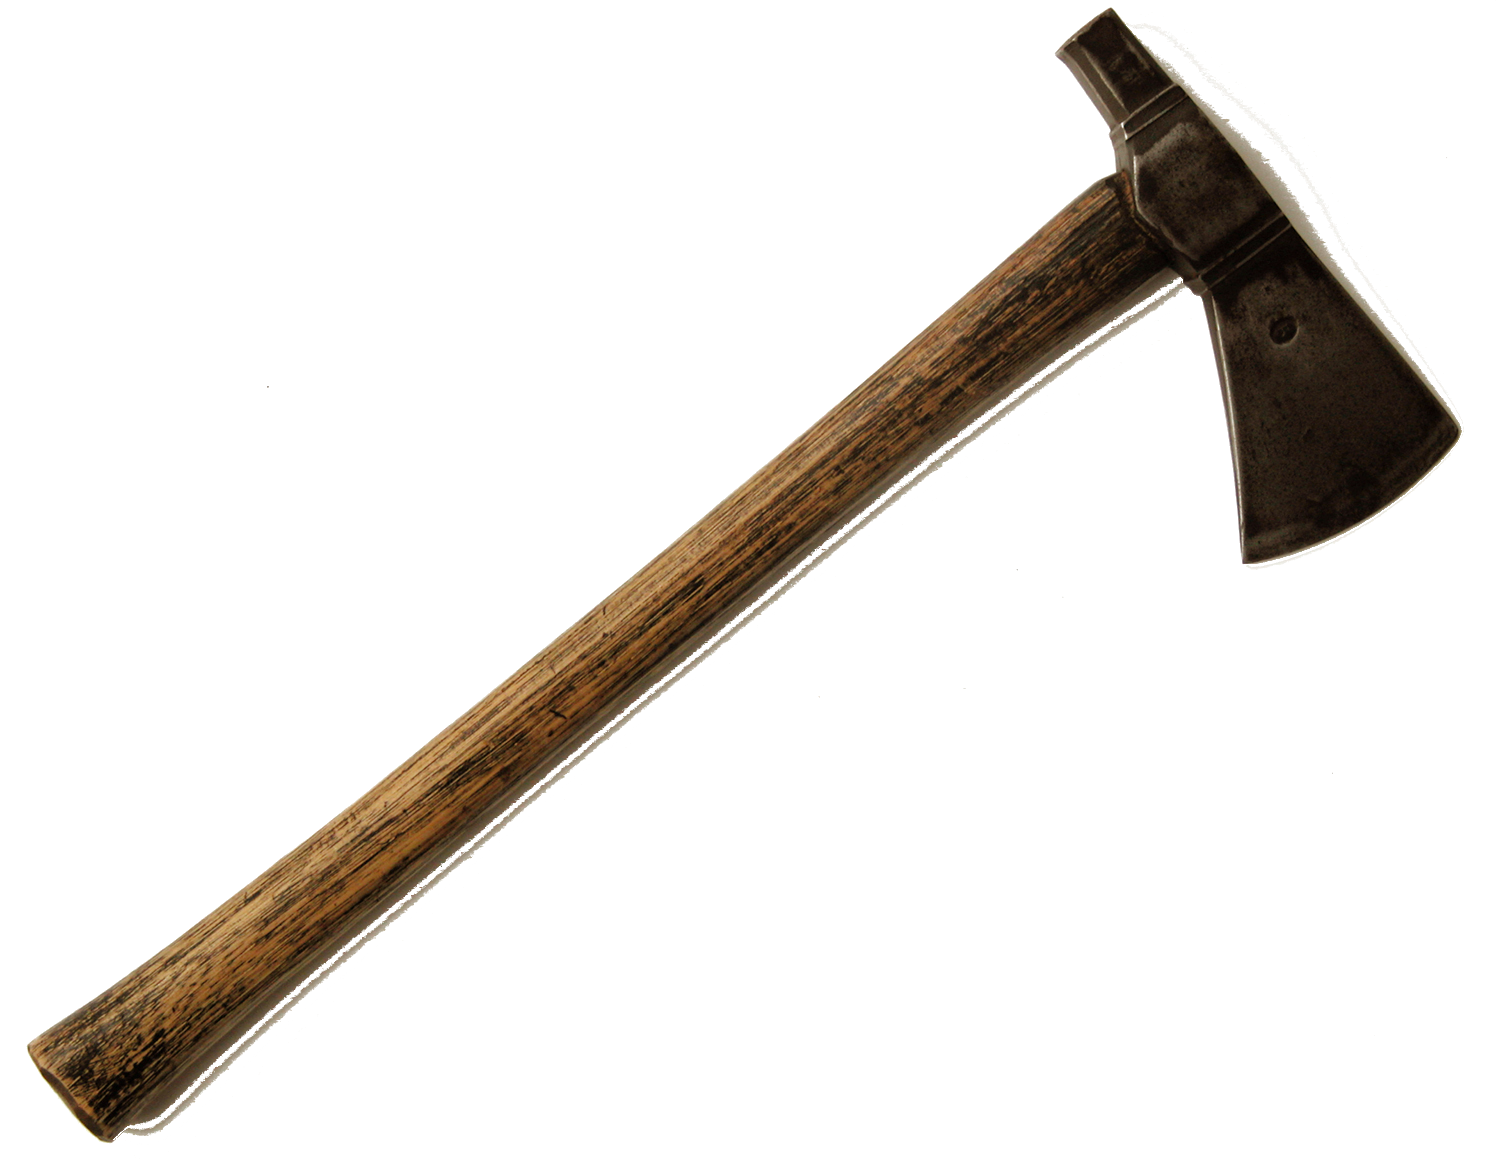 Fireman axe stock png by Dolo